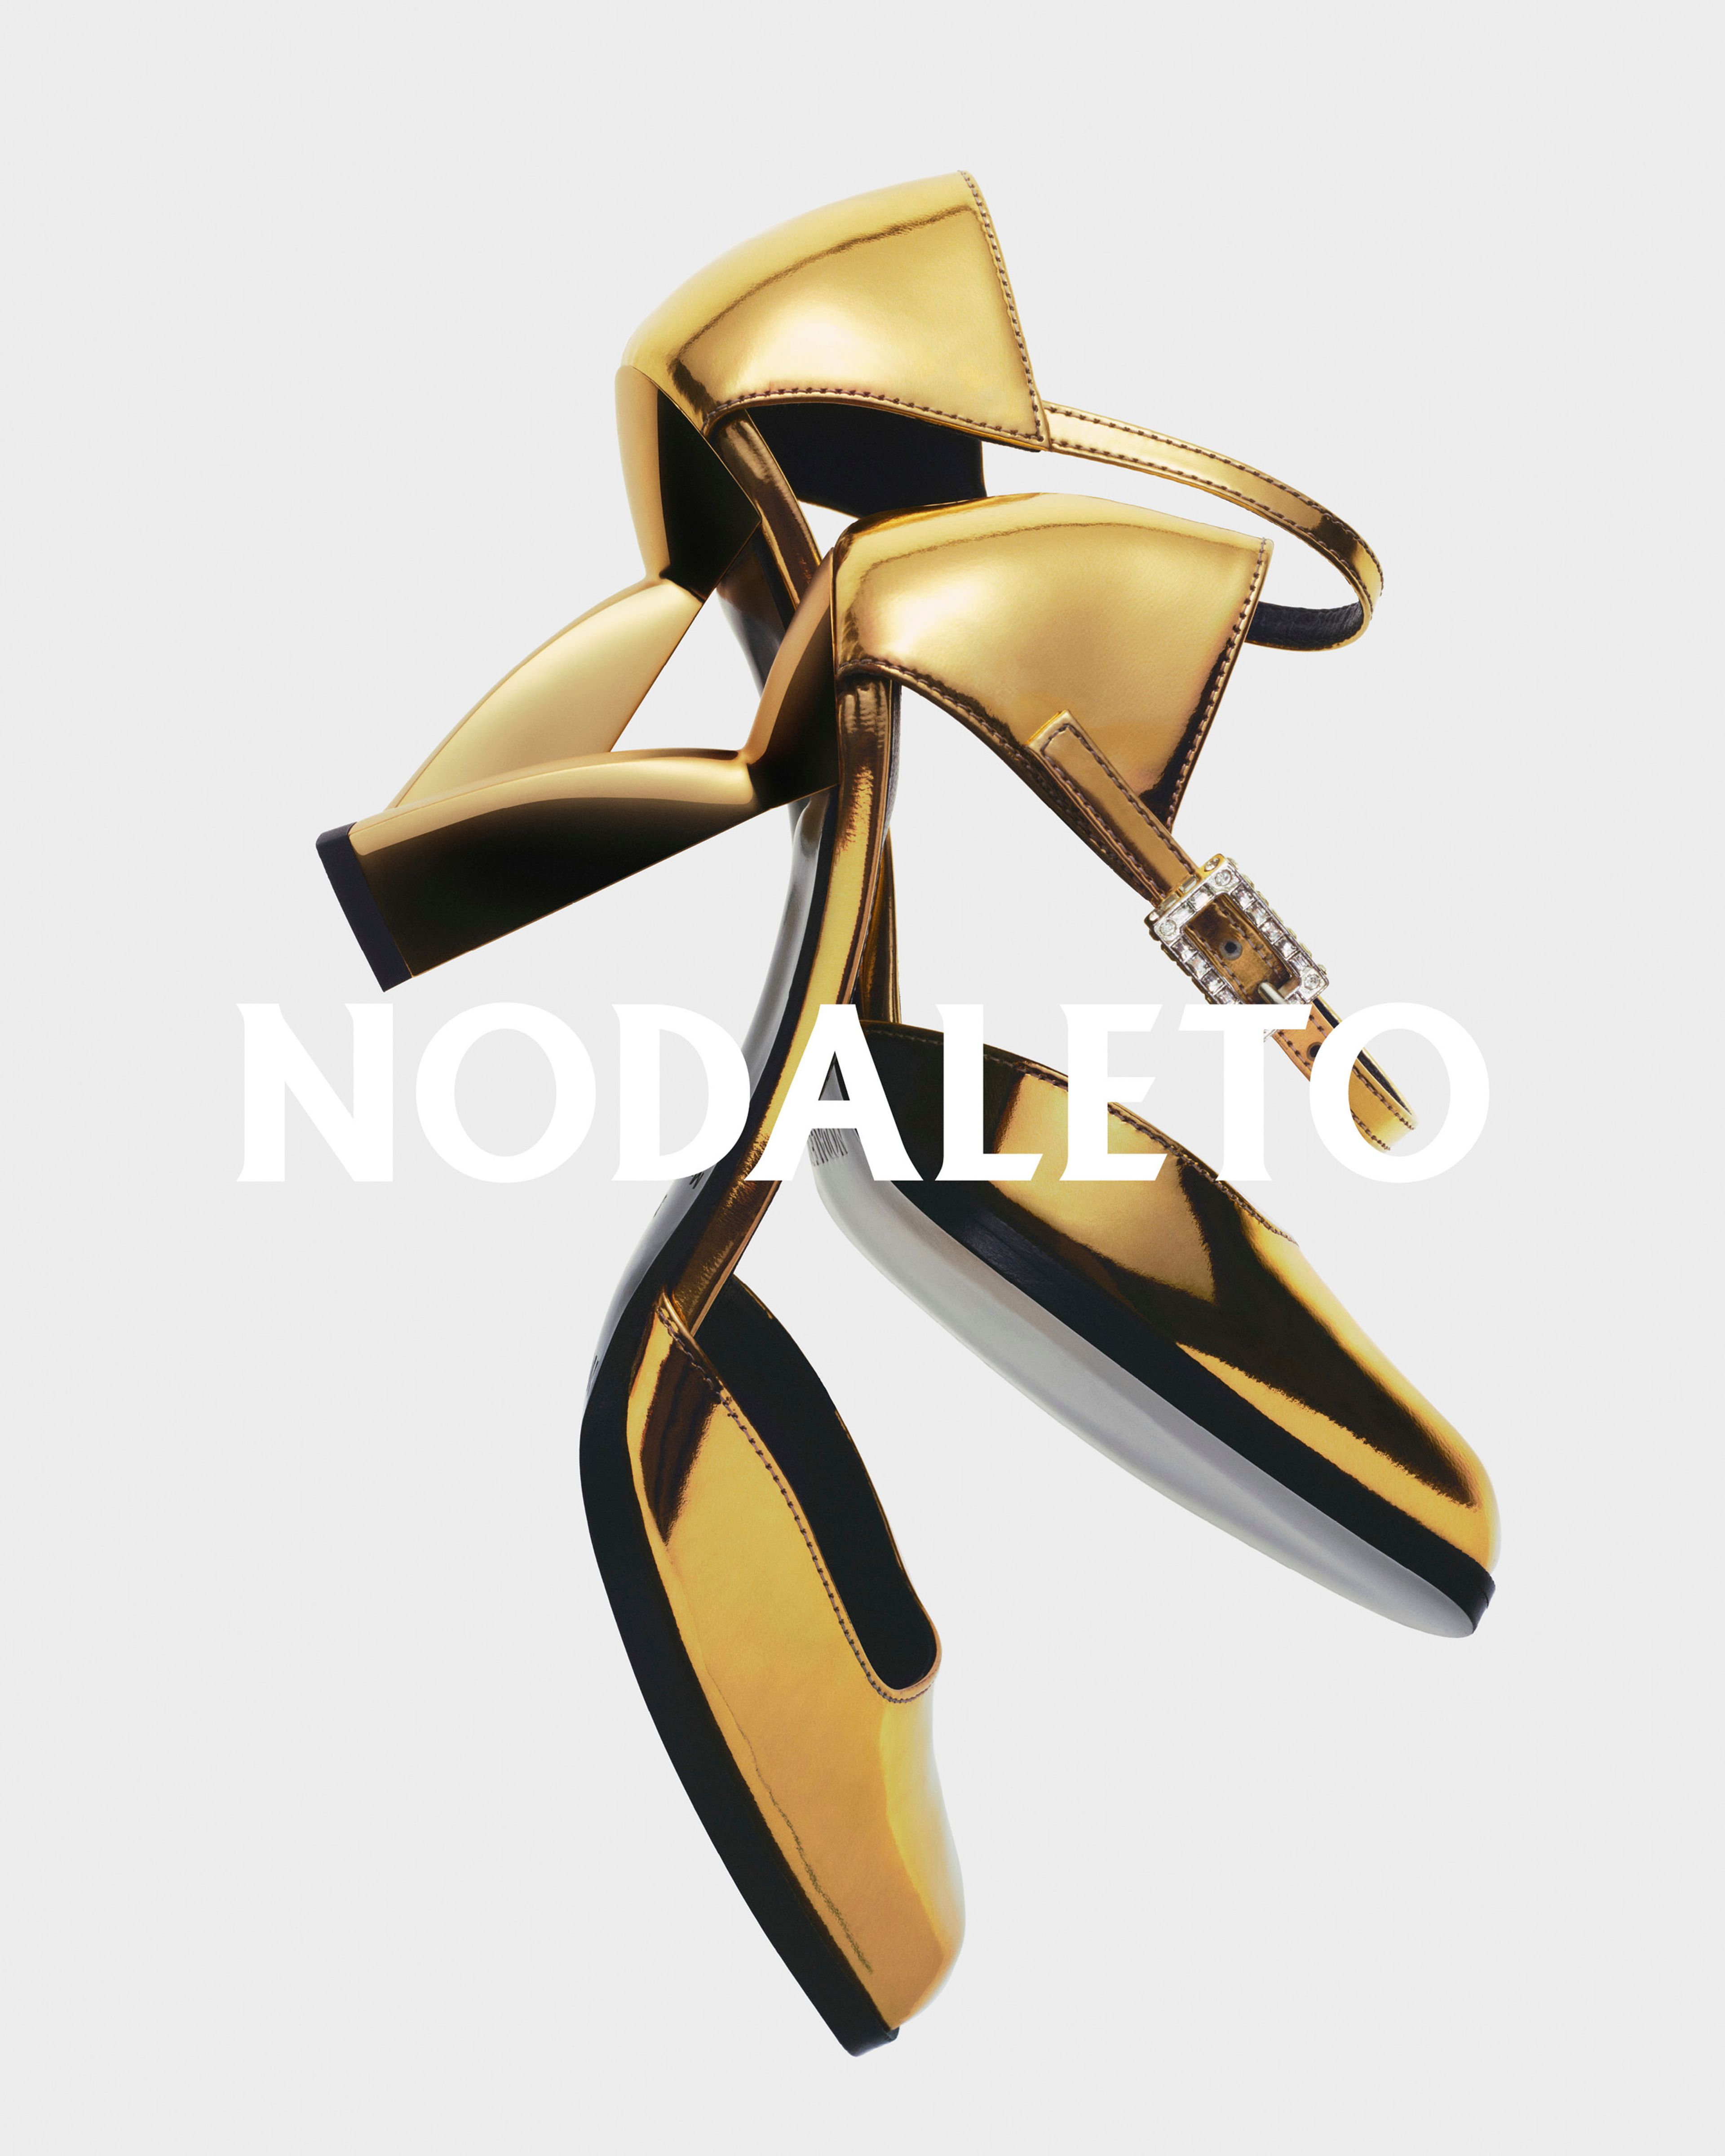 Nodaleto, 2023 Campaign - Romain Roucoules